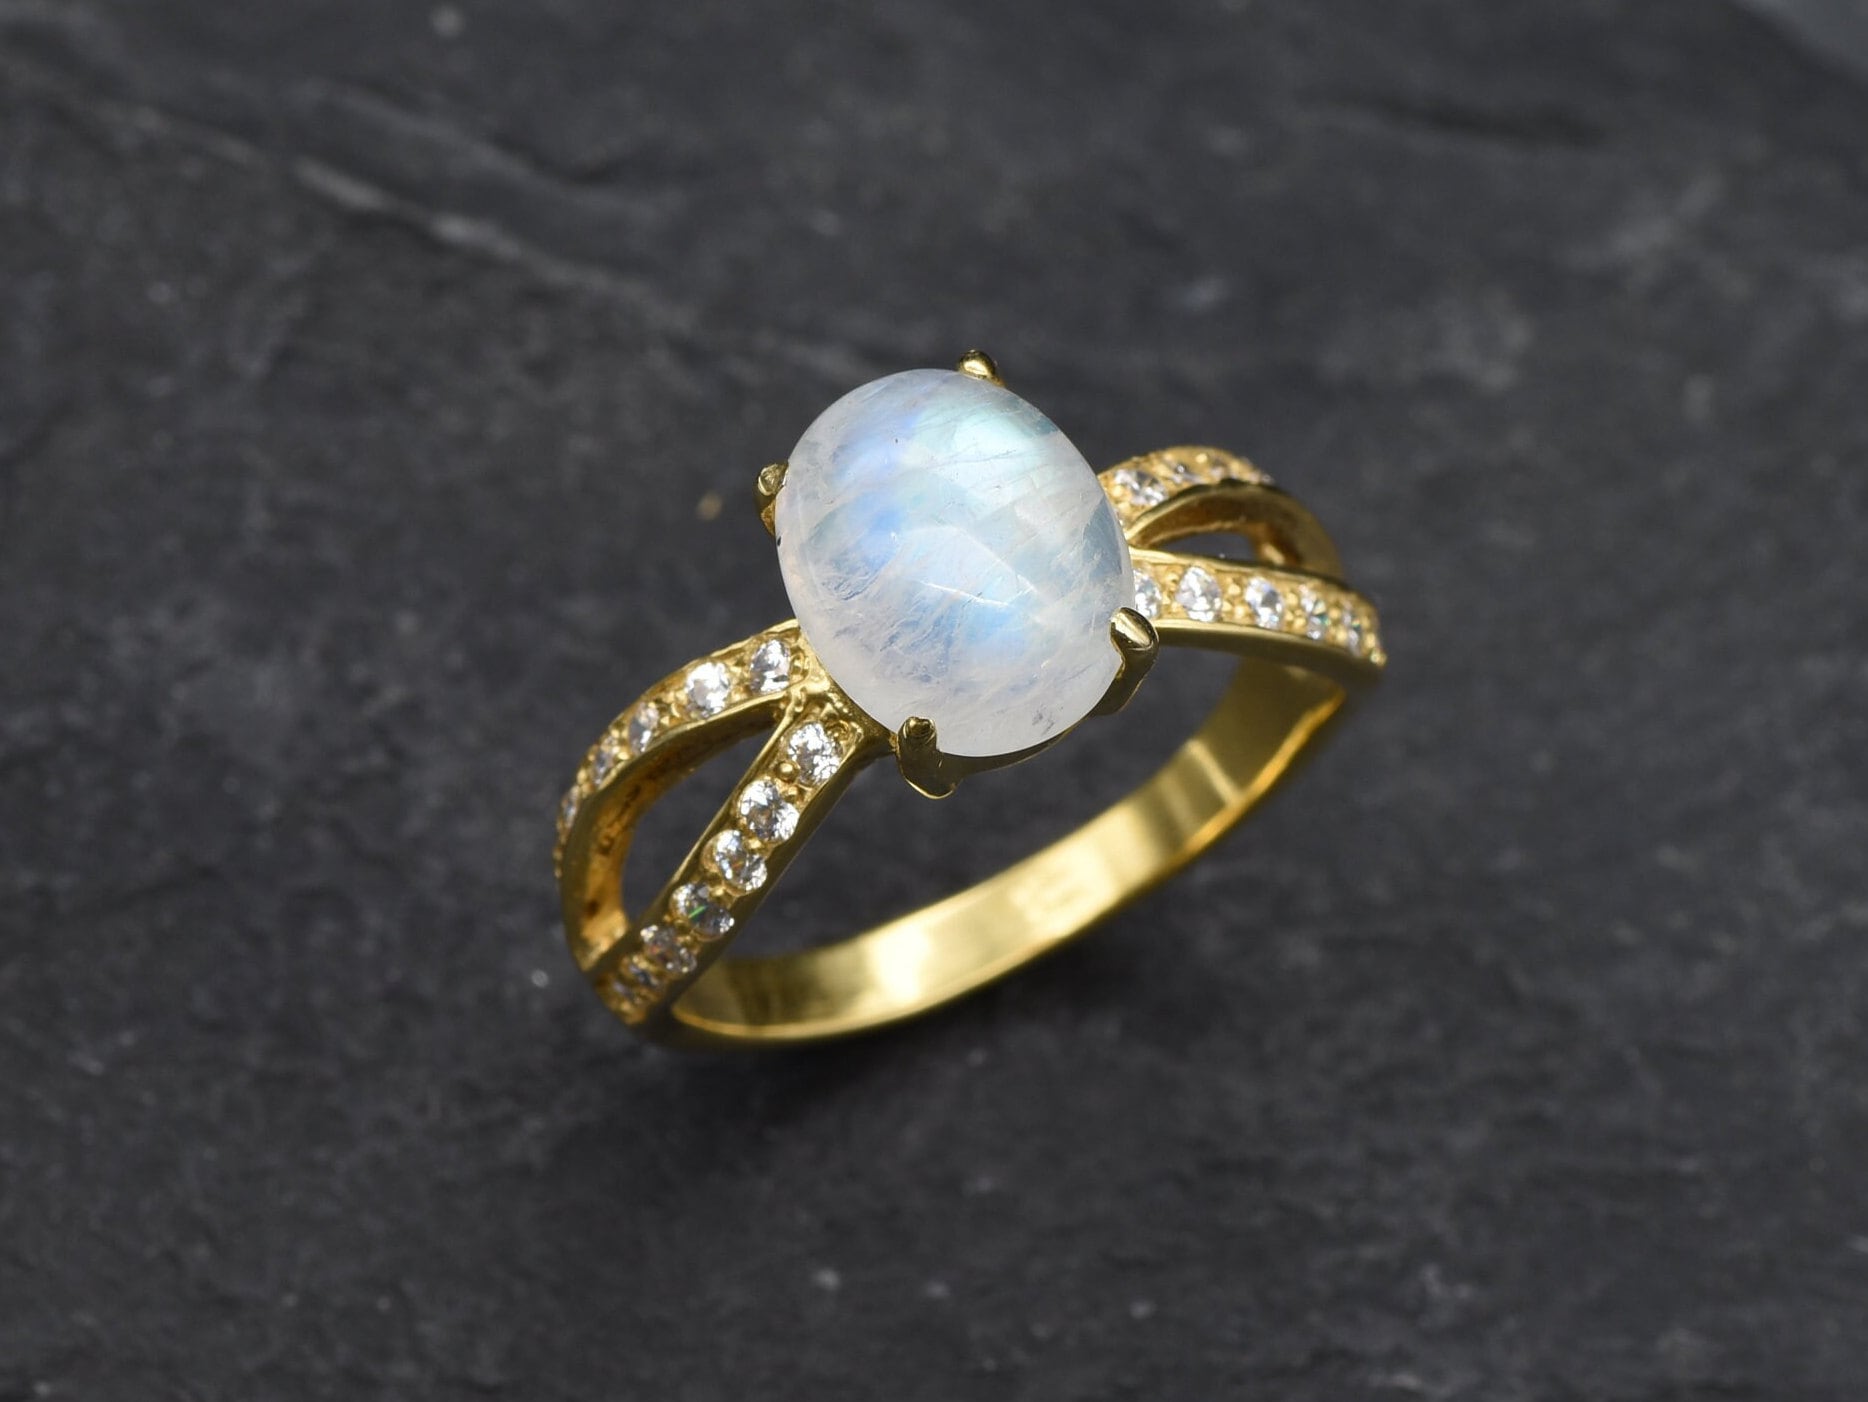 Gold Moonstone Ring, Moonstone Ring, Natural Moonstone, June Birthstone, Engagement Ring, Vintage Ring, Gold Solitaire Ring, 925 Silver Ring